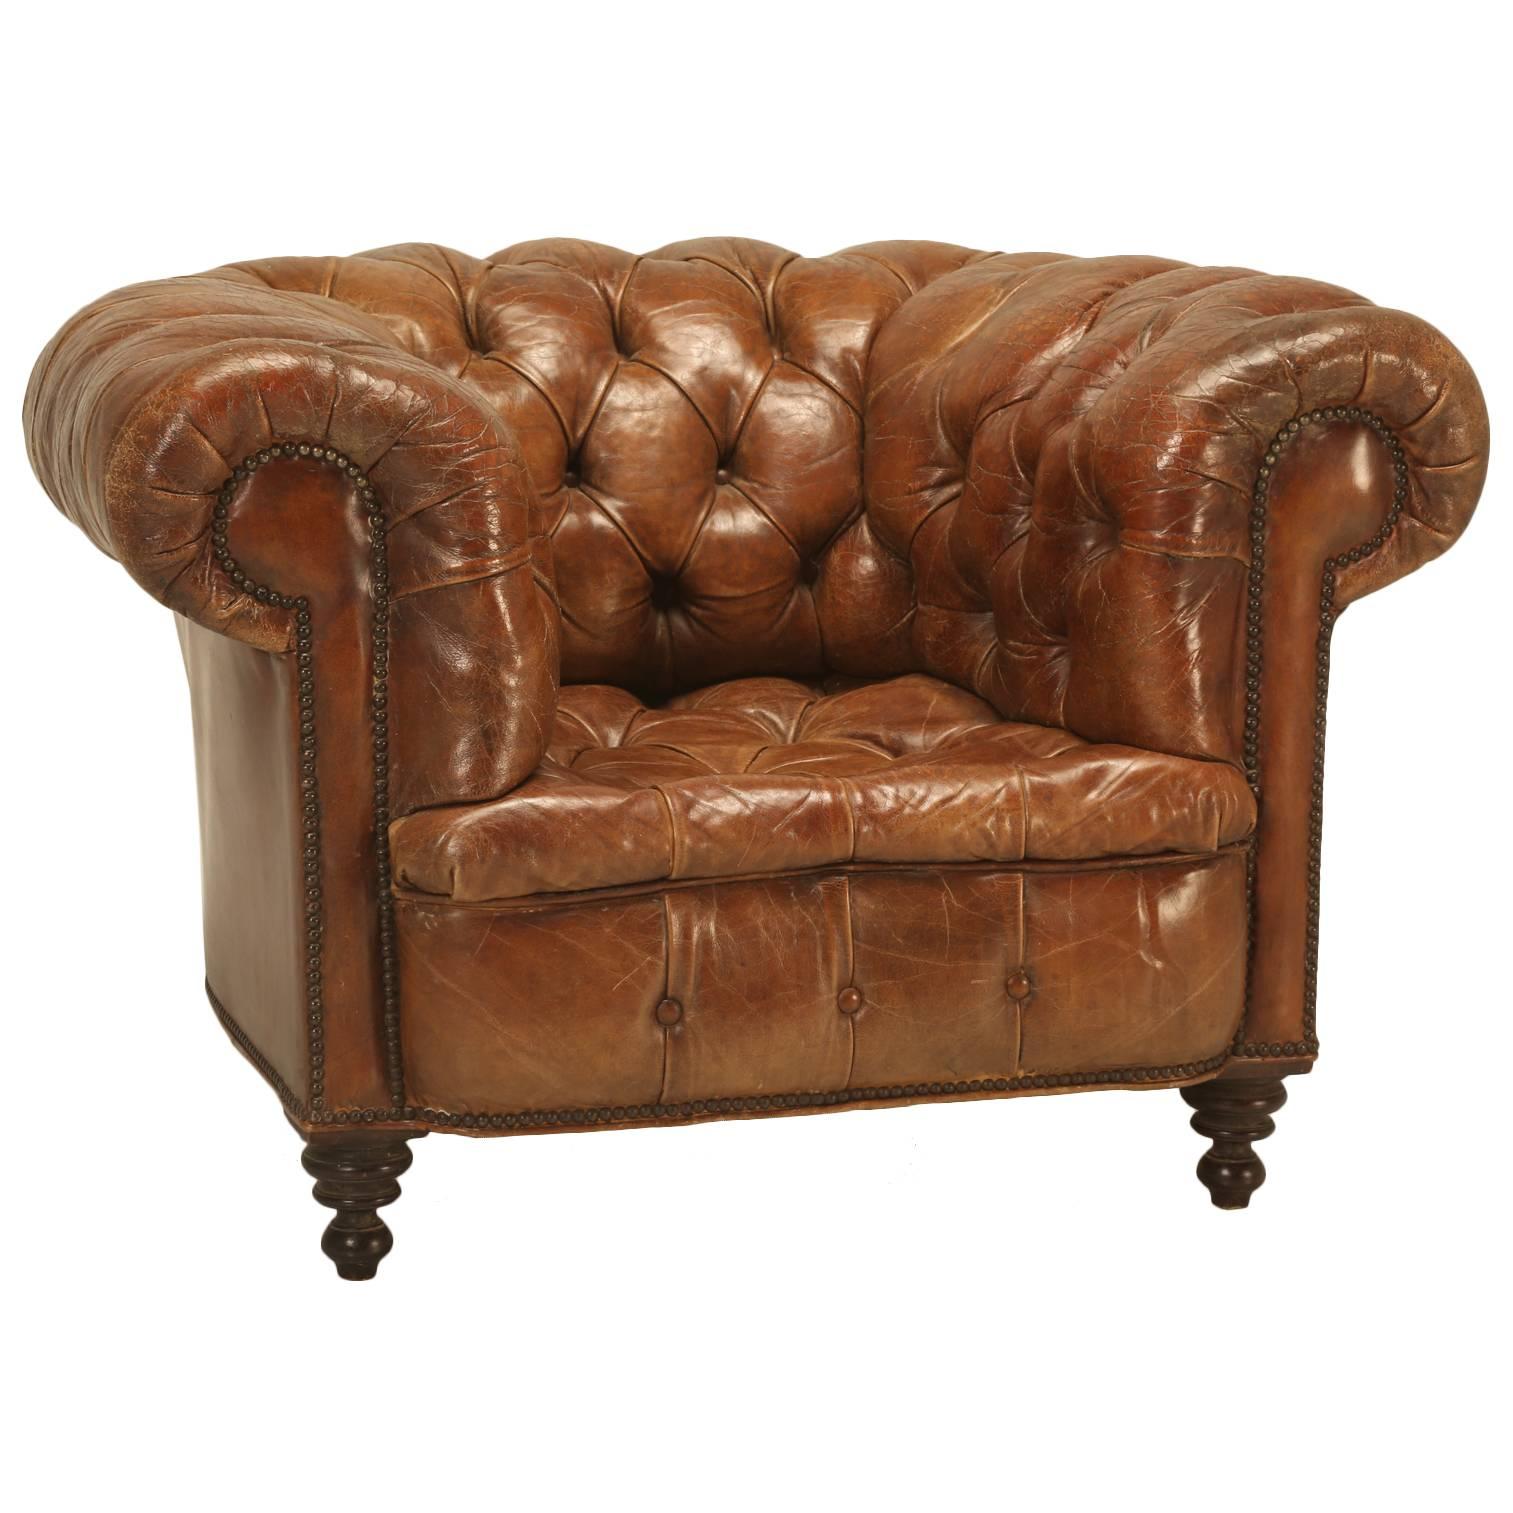 Antique Chesterfield Chair in Original Leather and Horsehair Stuffing circa 1900